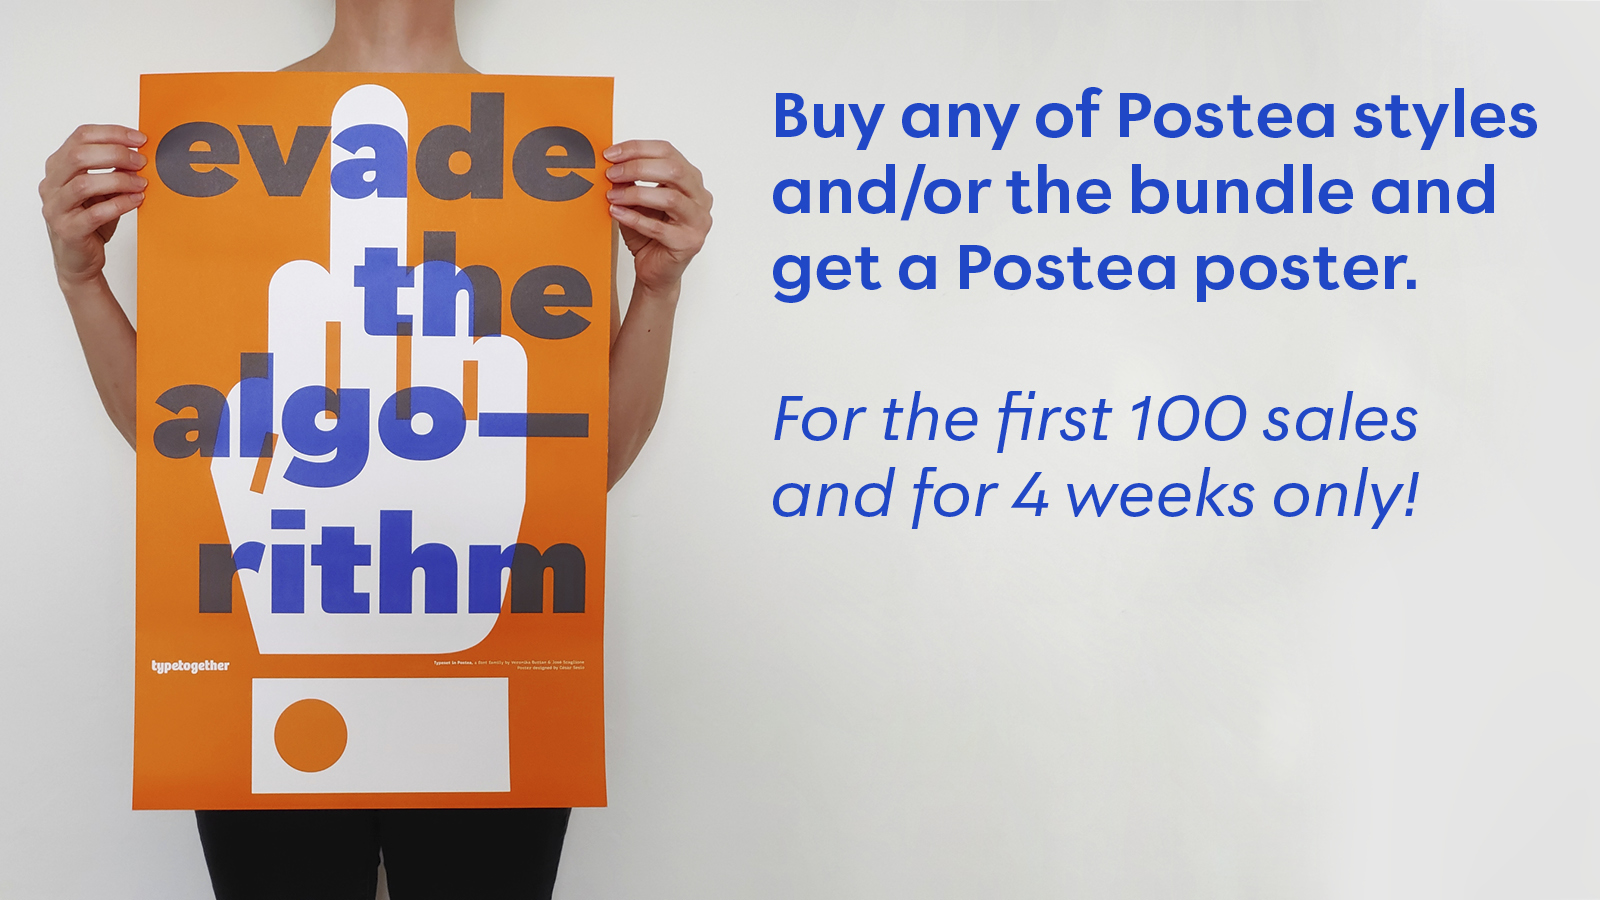 Get a Postea poster for free